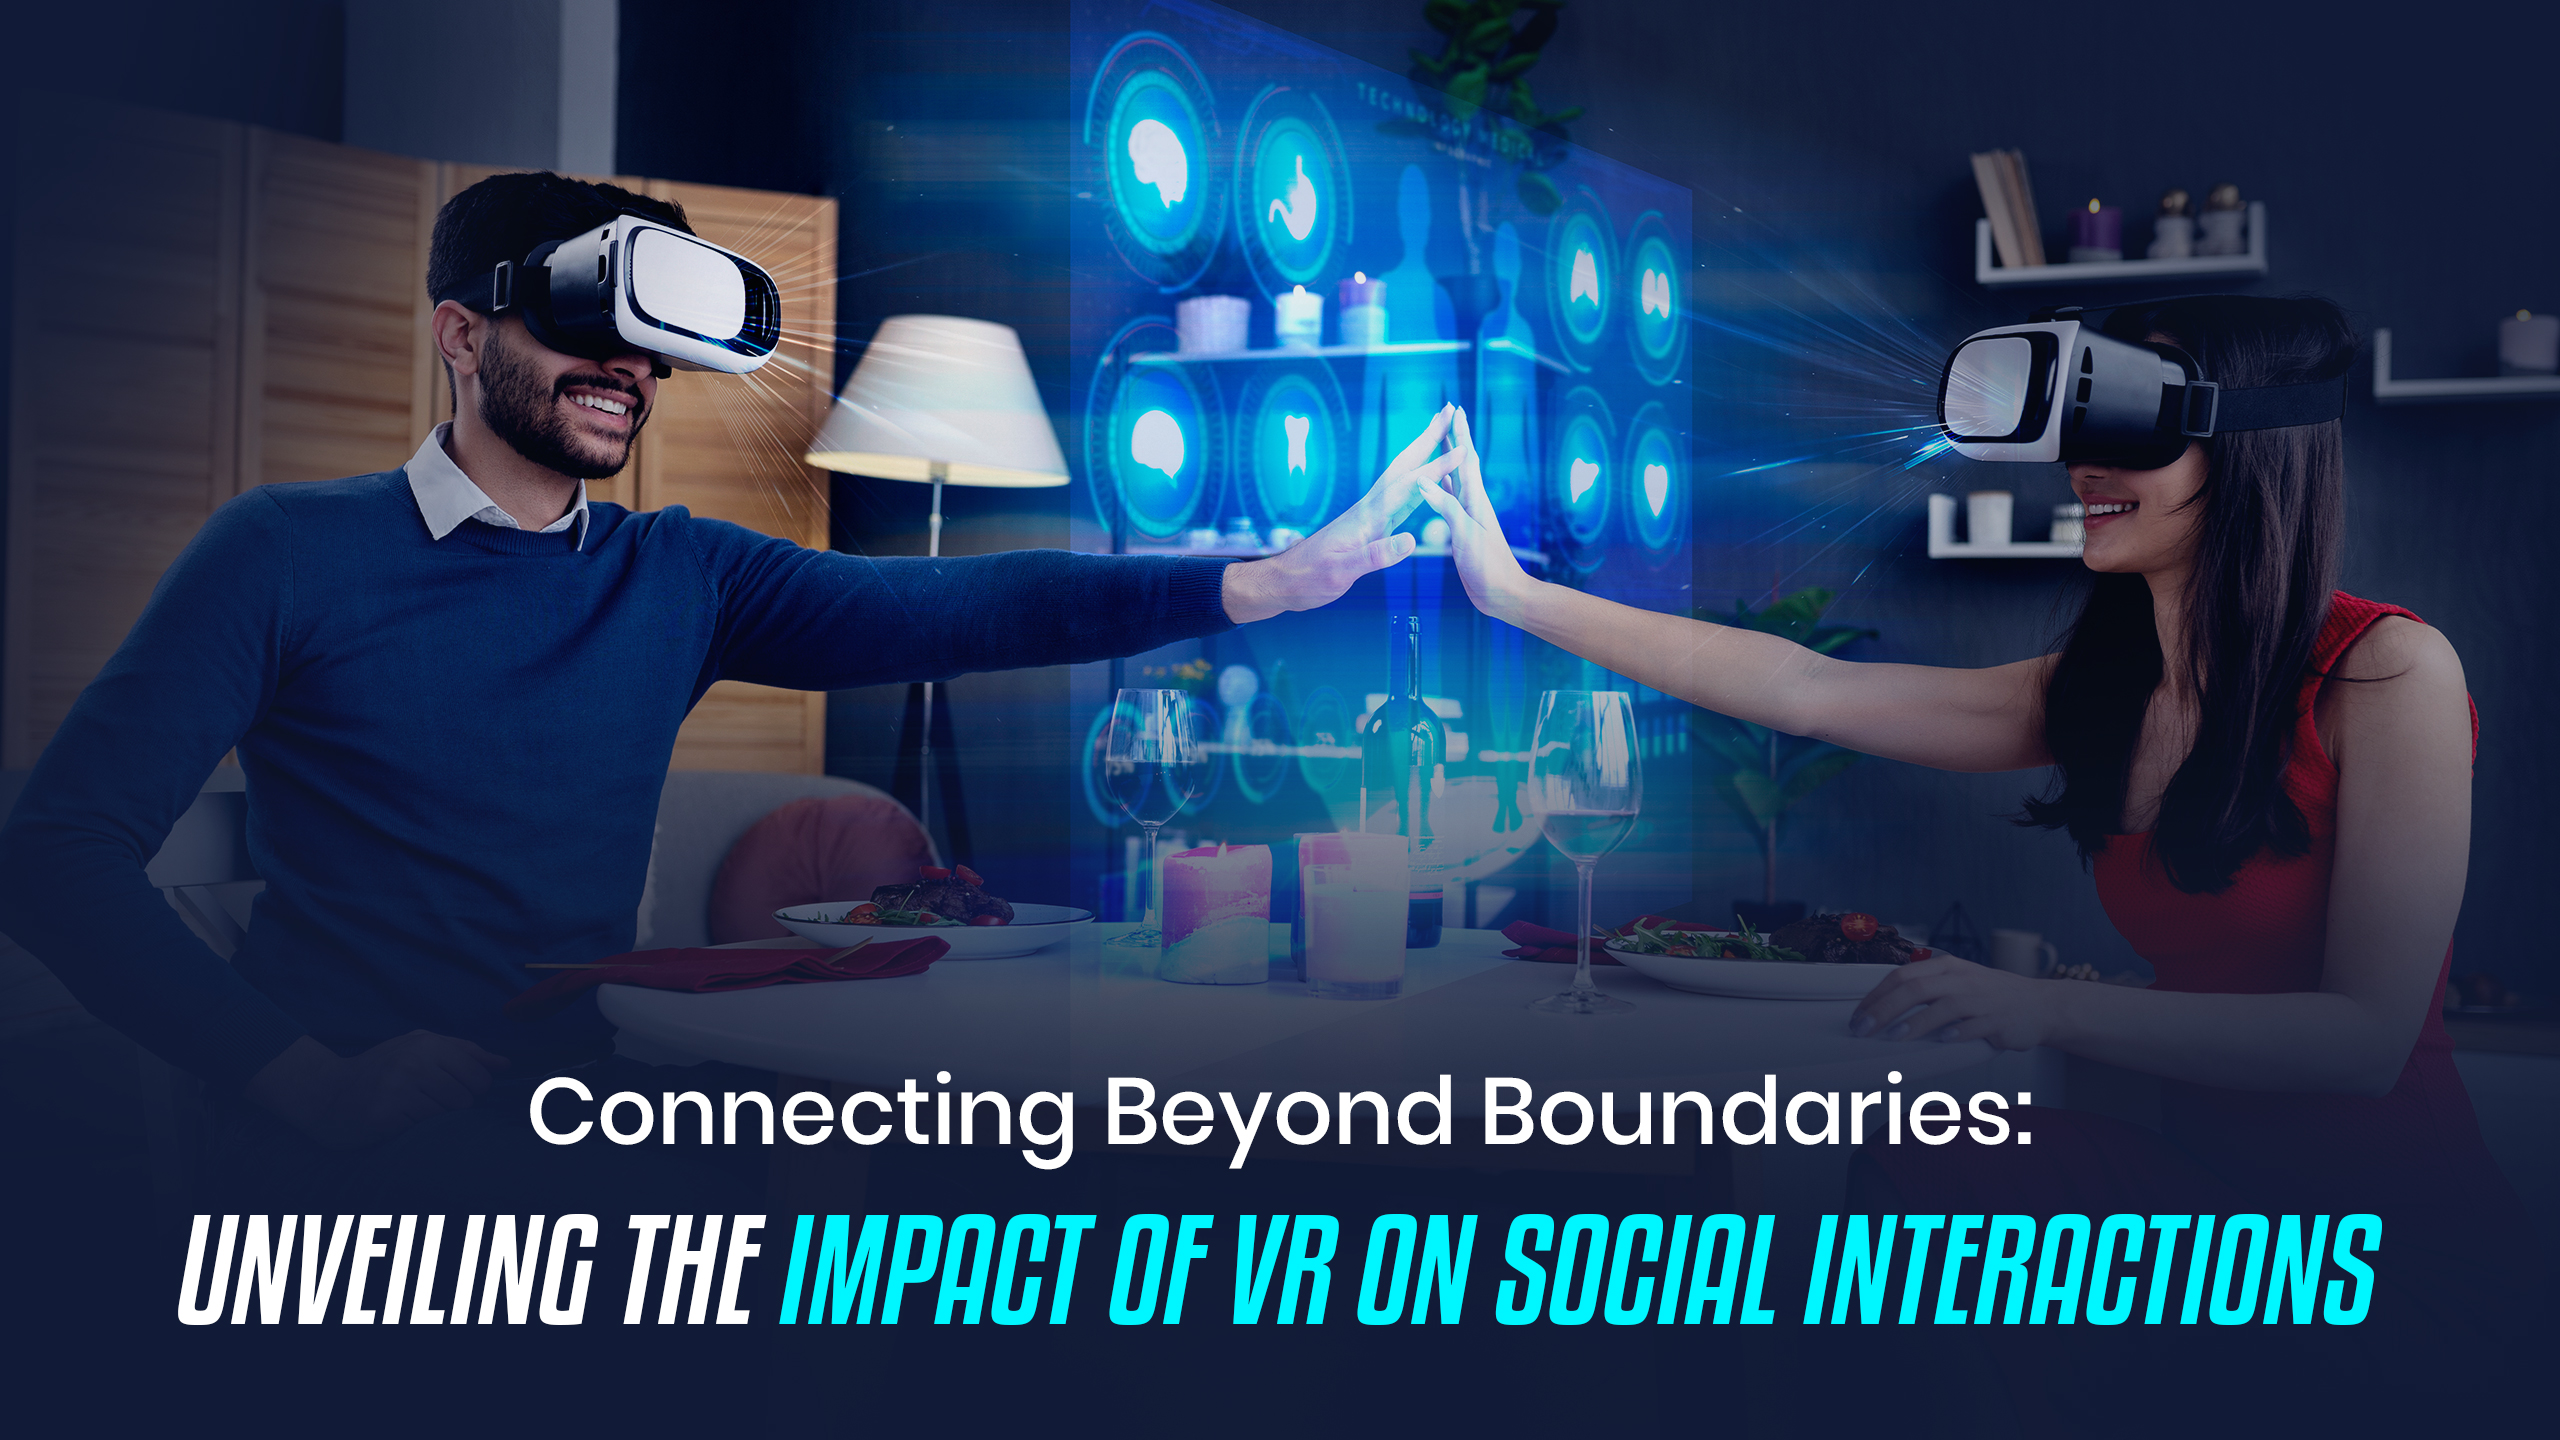 Impact of VR on Social Interactions